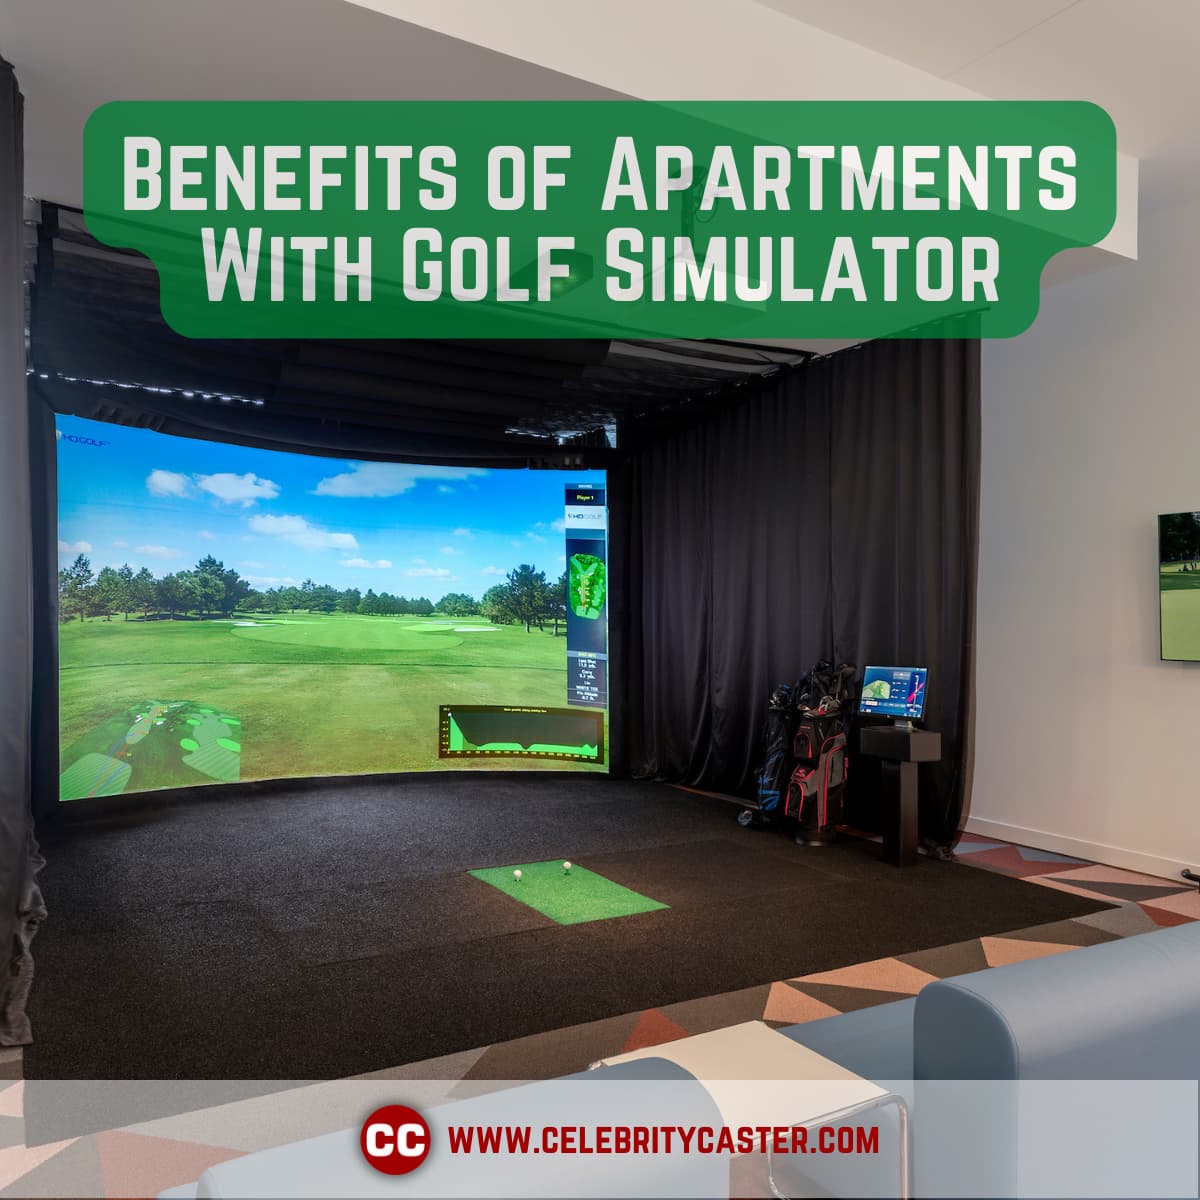 Are you searching for Apartments With Golf Simulator? I am going to guide you about benefits of Apartments With Golf Simulator with one click!